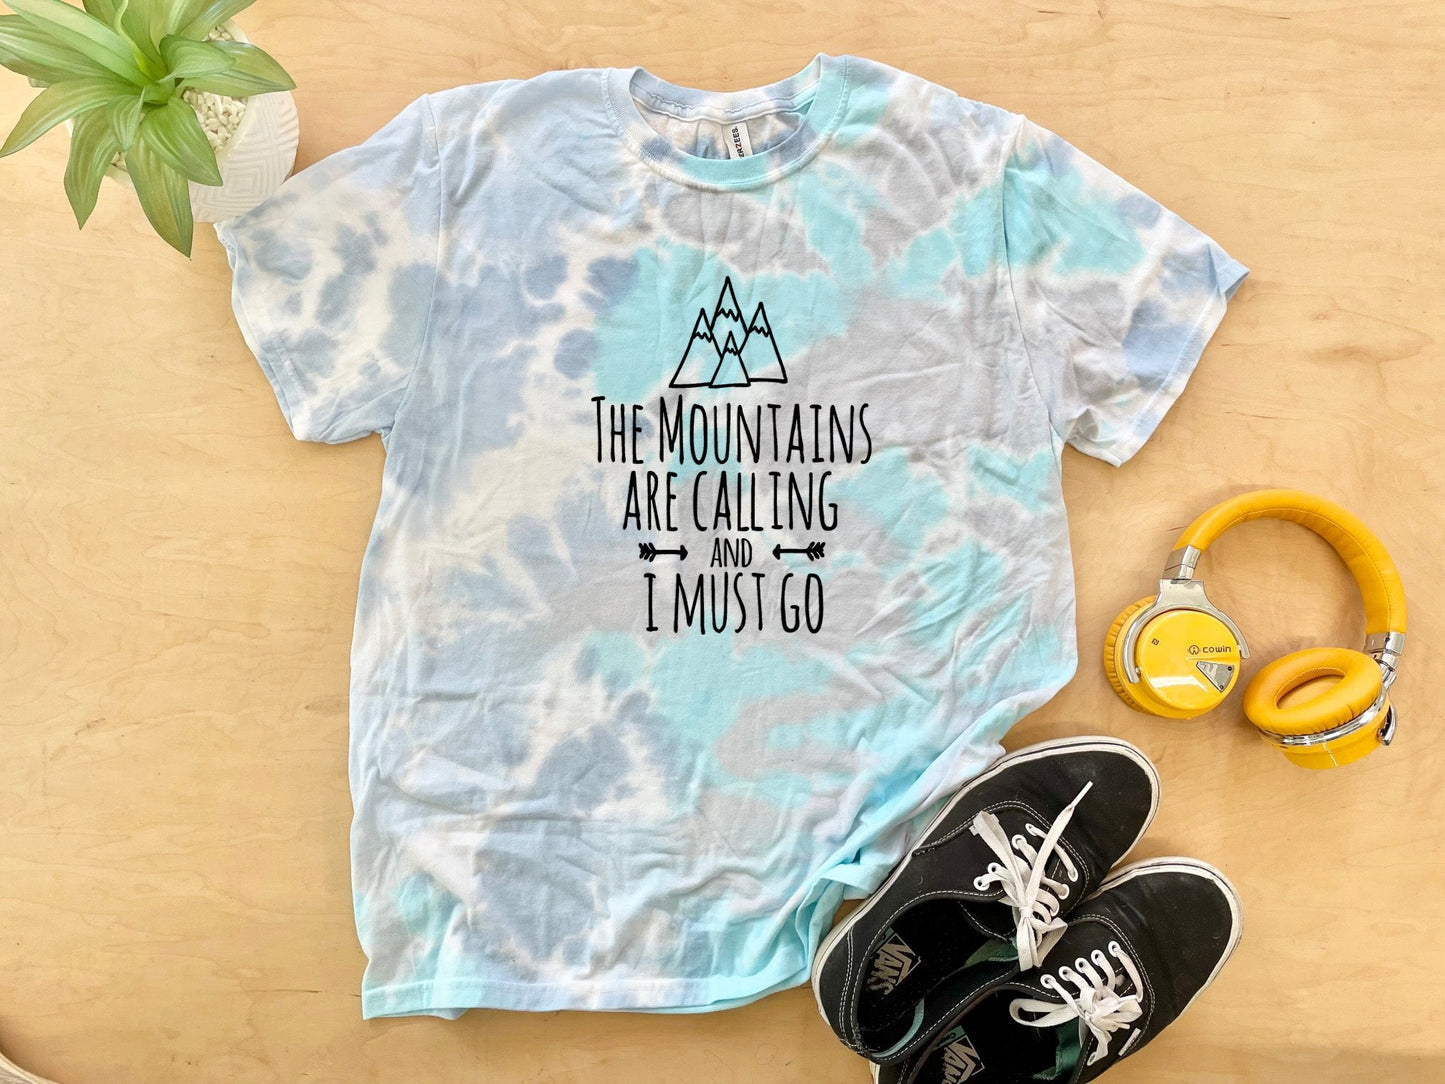 The Mountains Are Calling And I Must Go - Mens/Unisex Tie Dye Tee - Blue